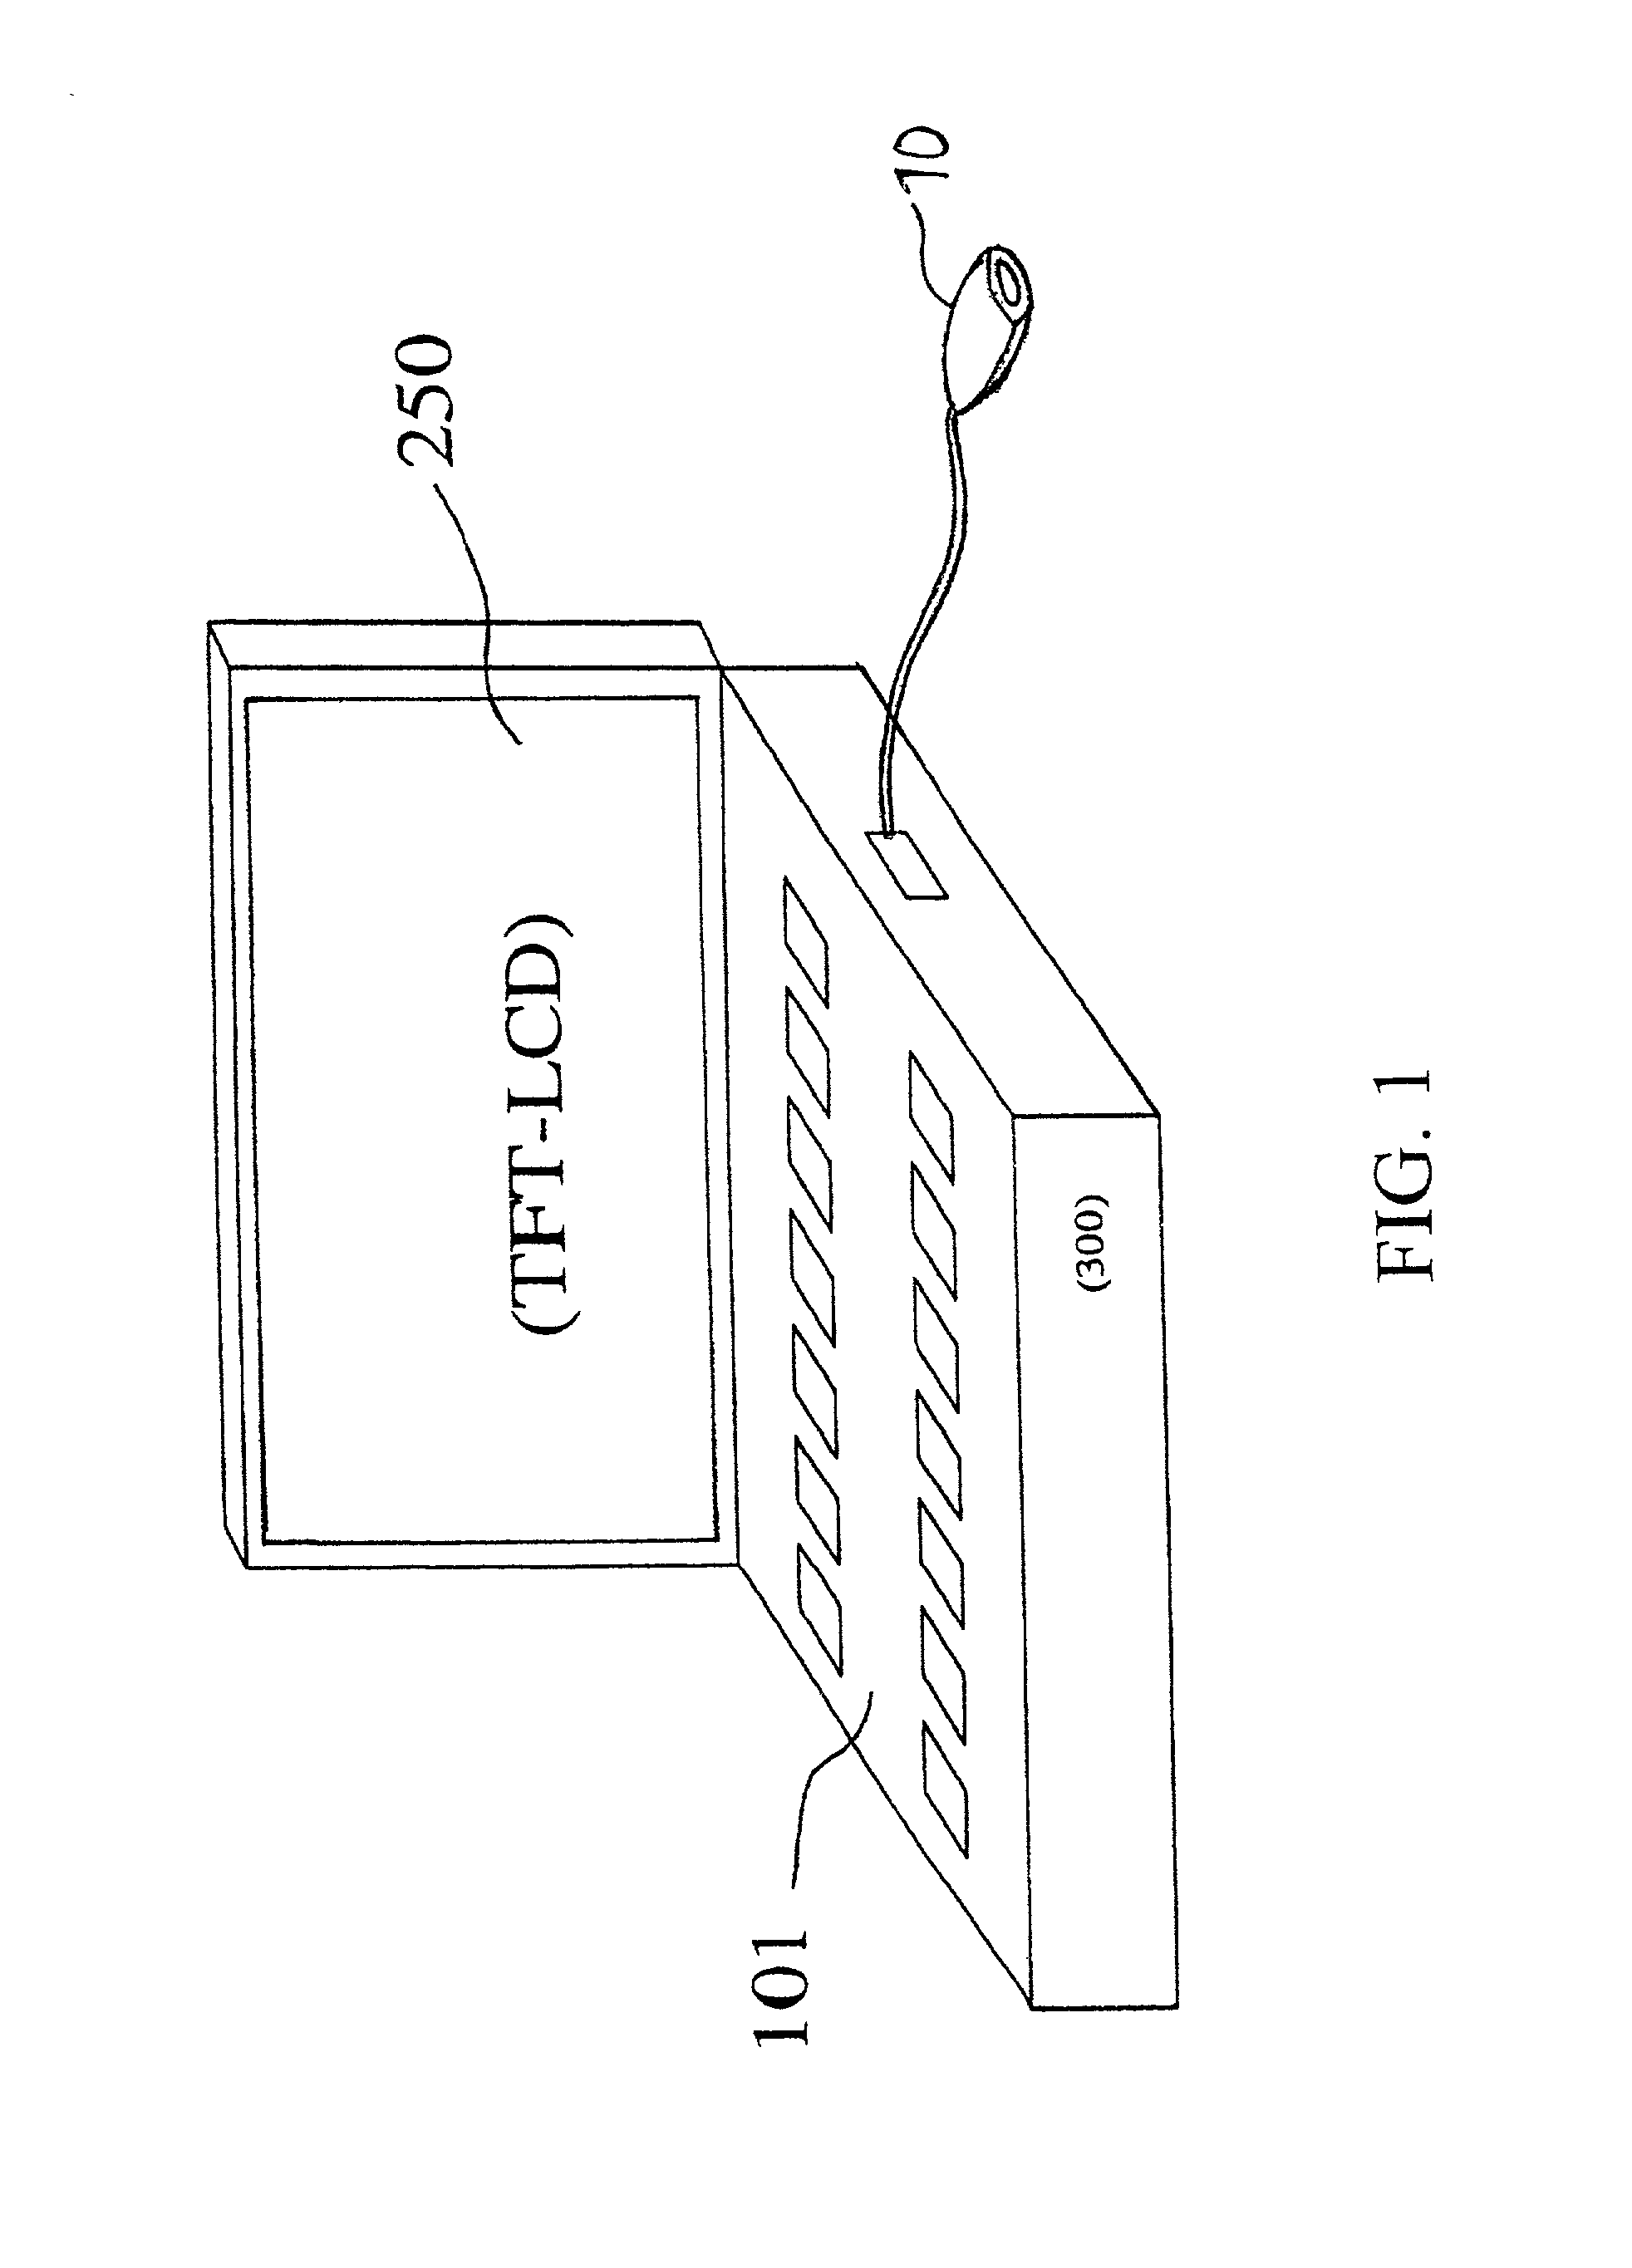 Apparatus for human interfaces of an ultrasonic diagnostic system